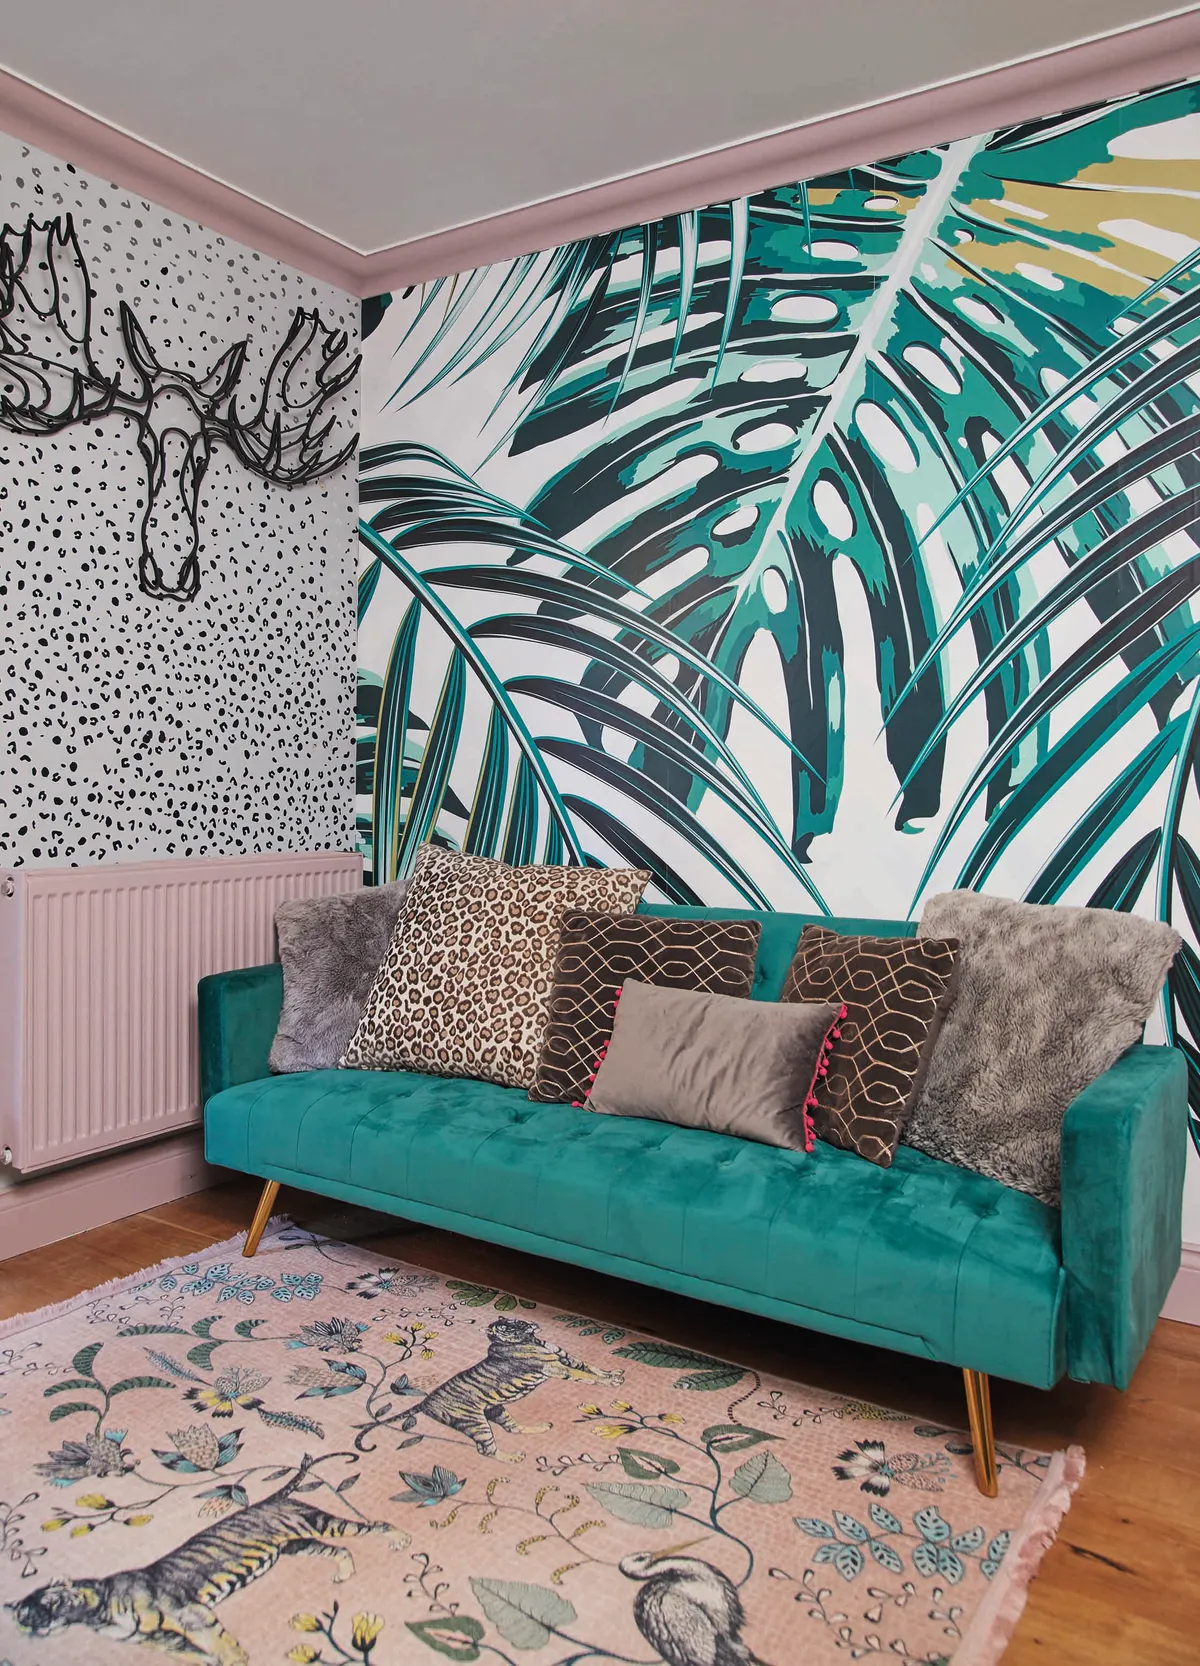 Emily's playroom features two bold wallpaper designs and a pink painted radiator